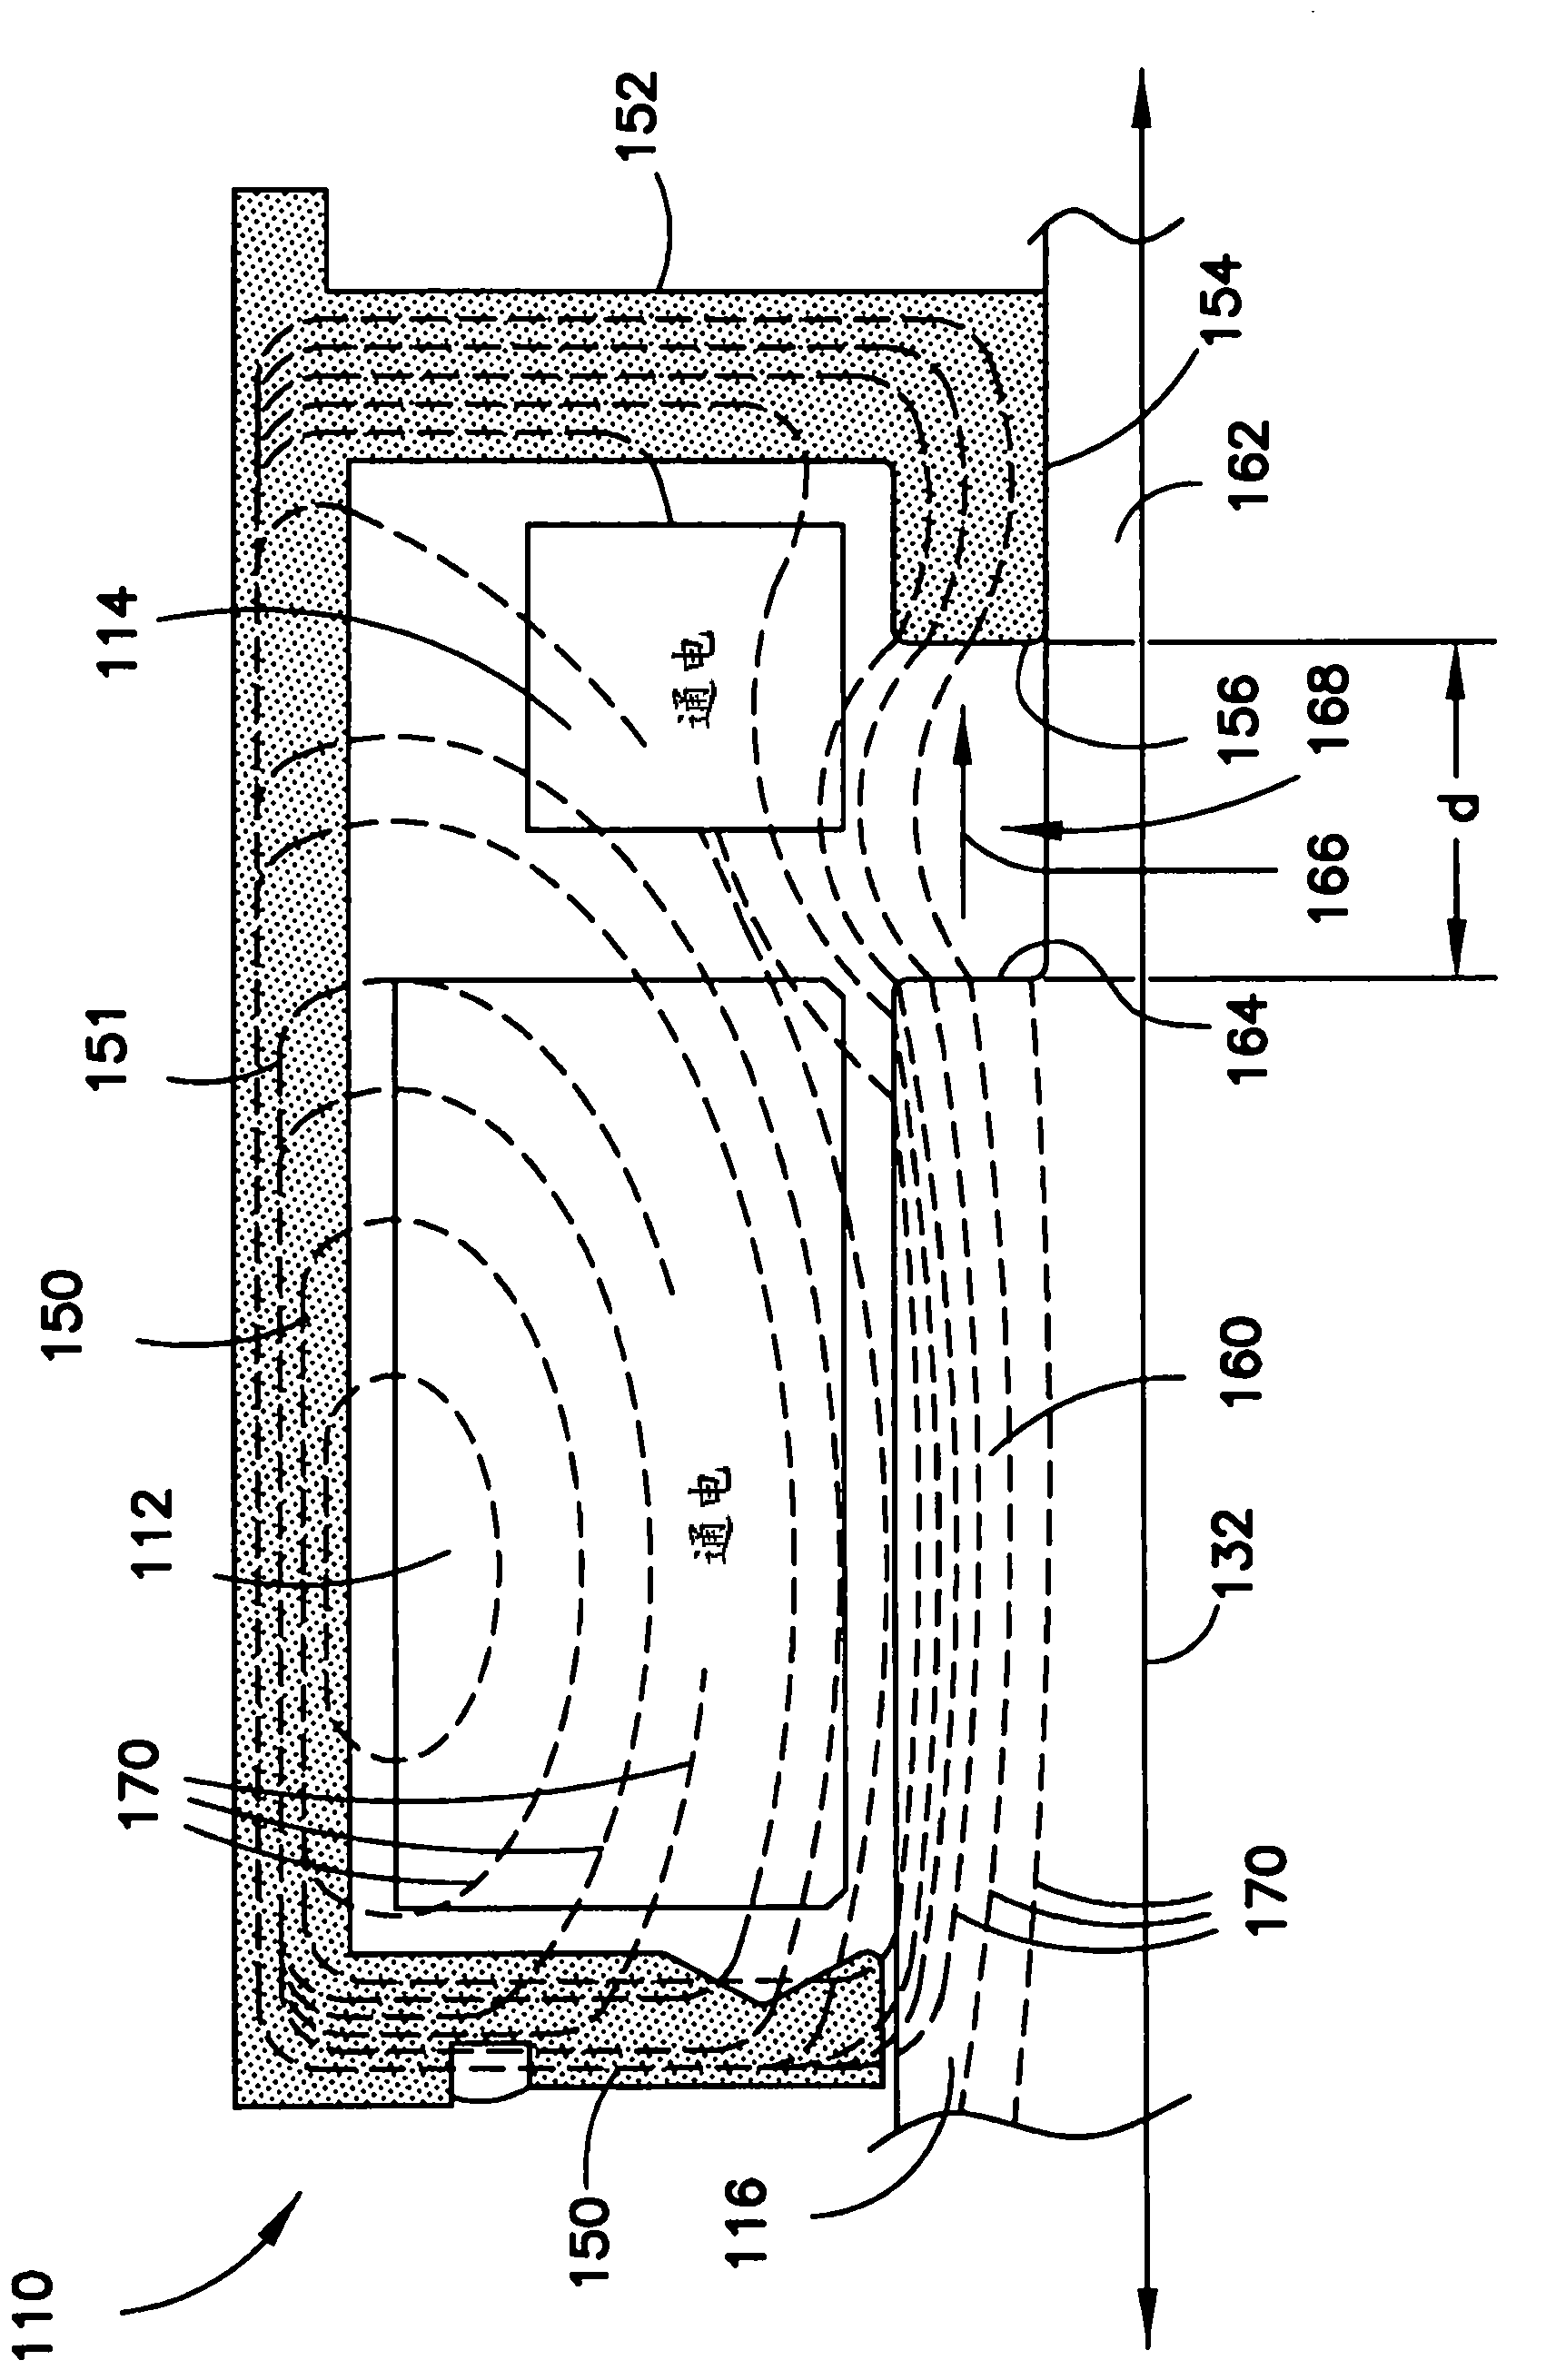 Starter motor solenoid with variable reluctance plunger